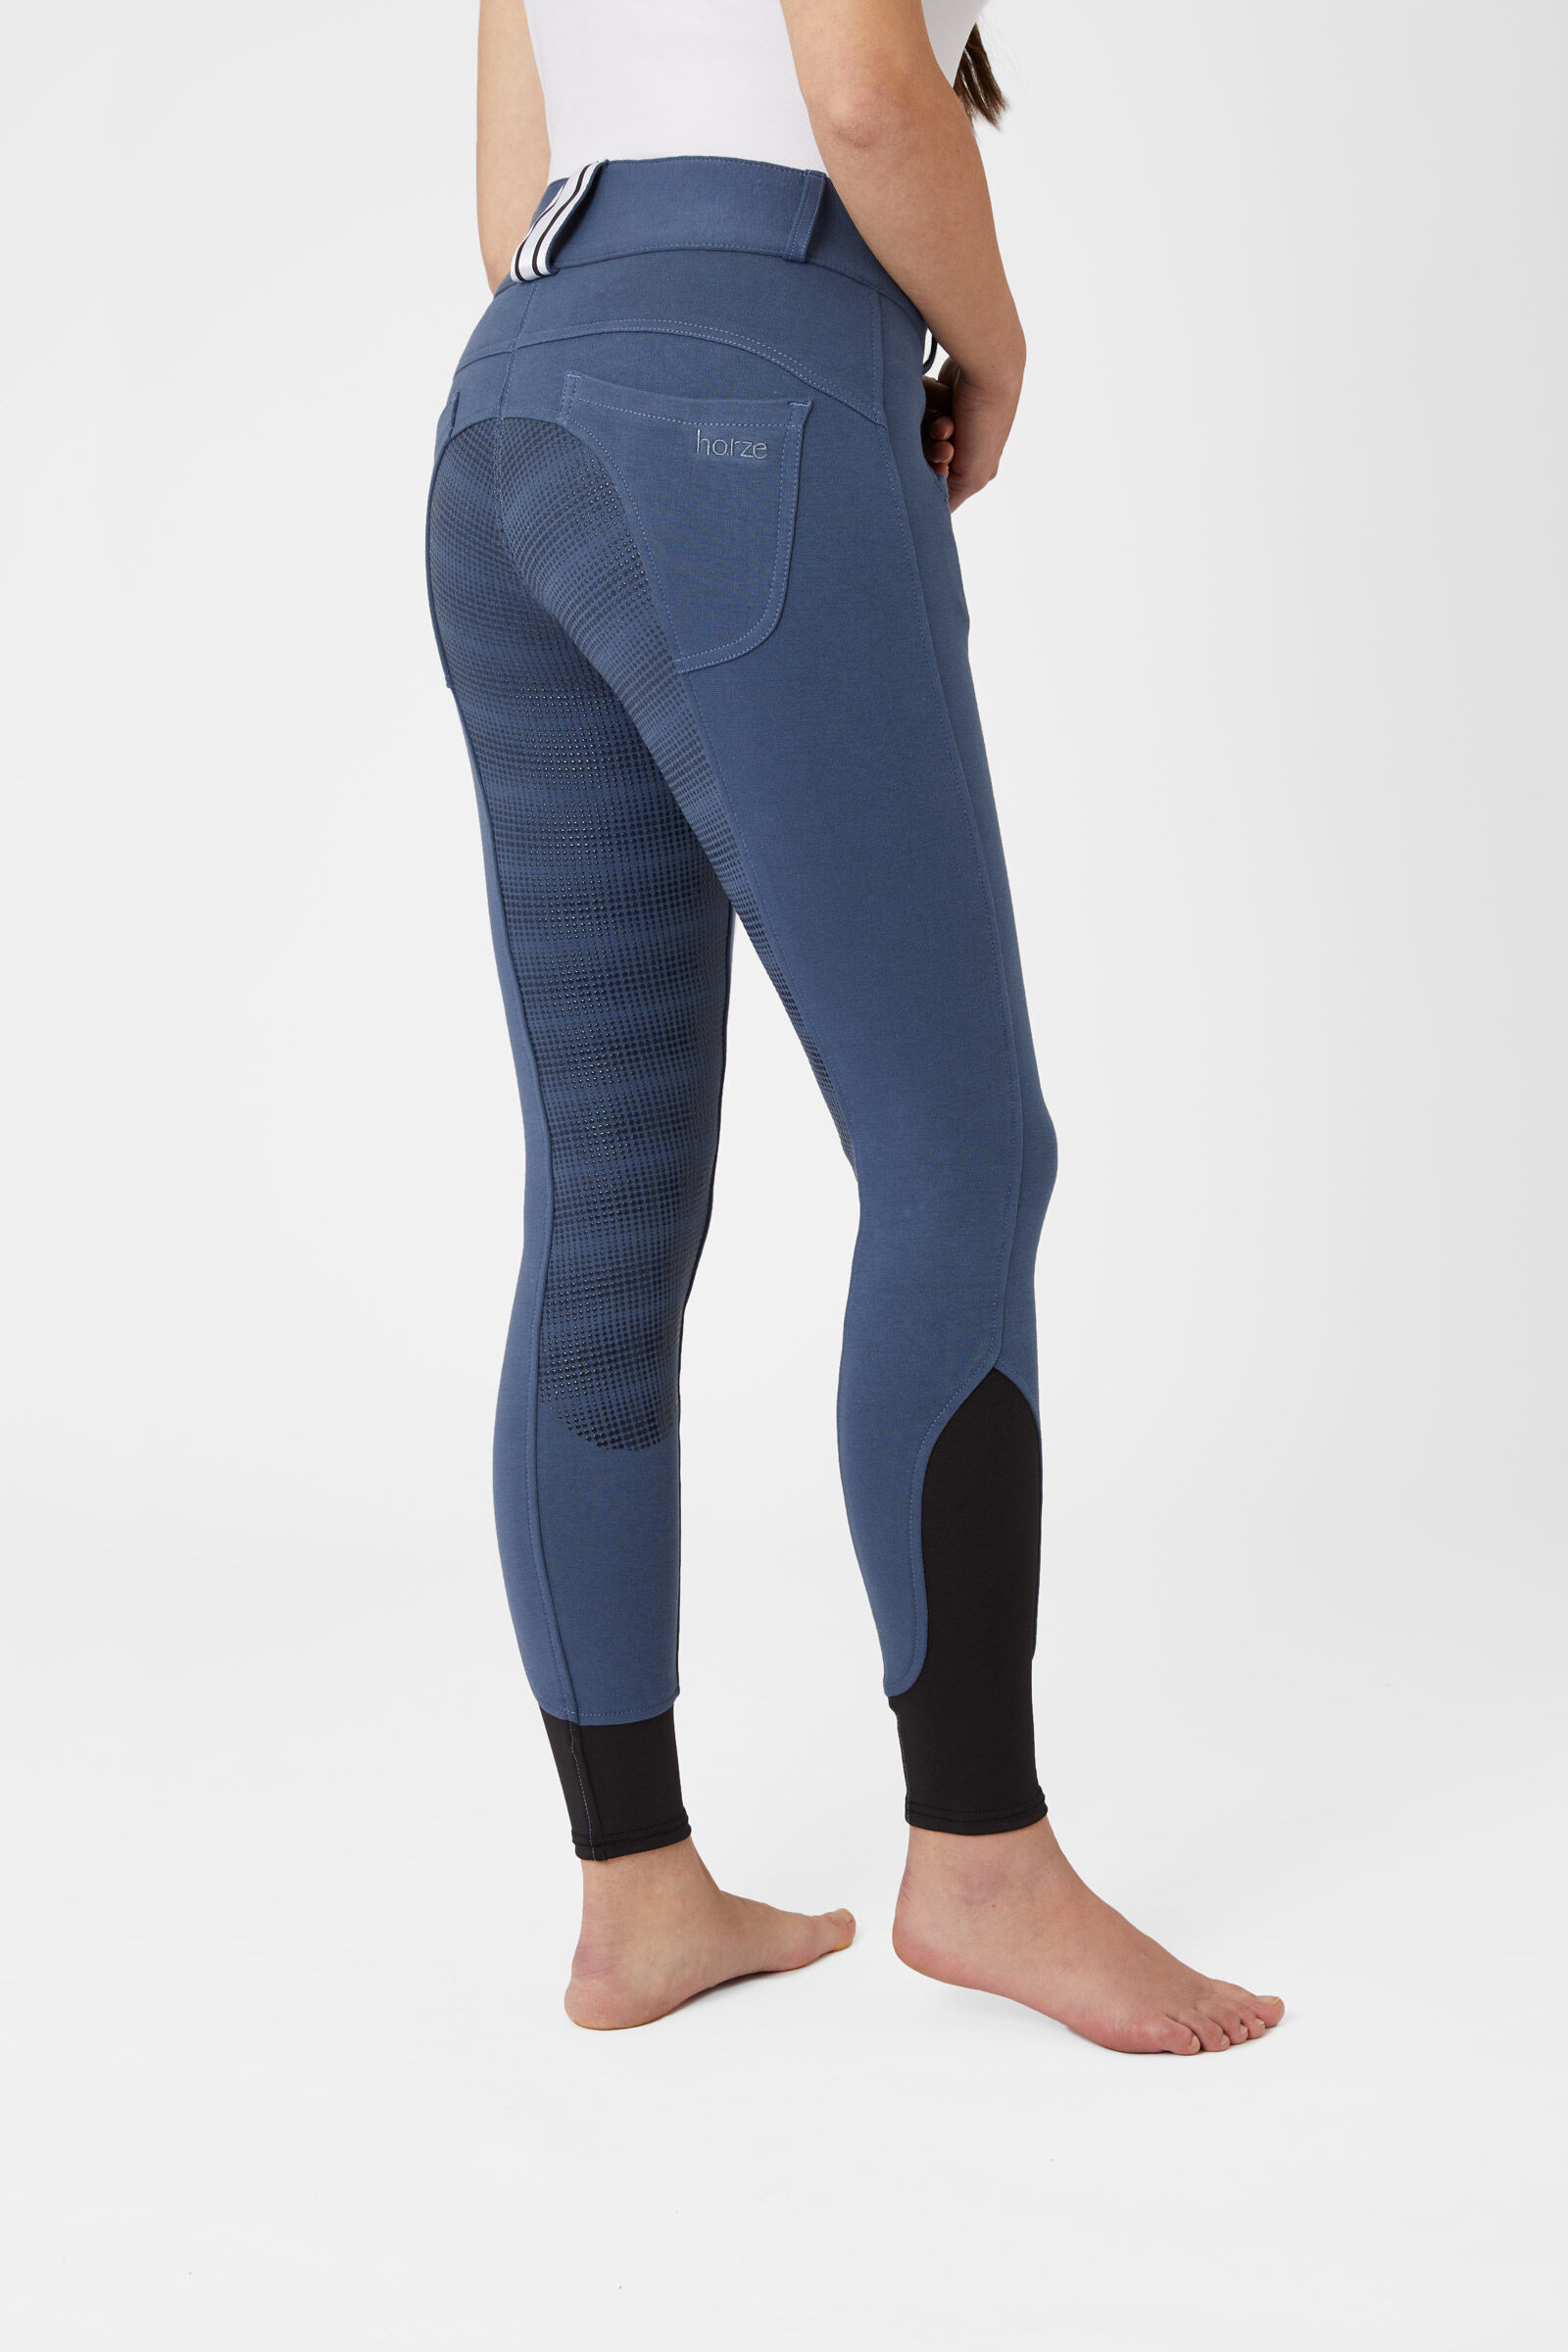 FitsT4 Sports FitsT4 Women's Horse Riding Pants Knee-Patch India | Ubuy